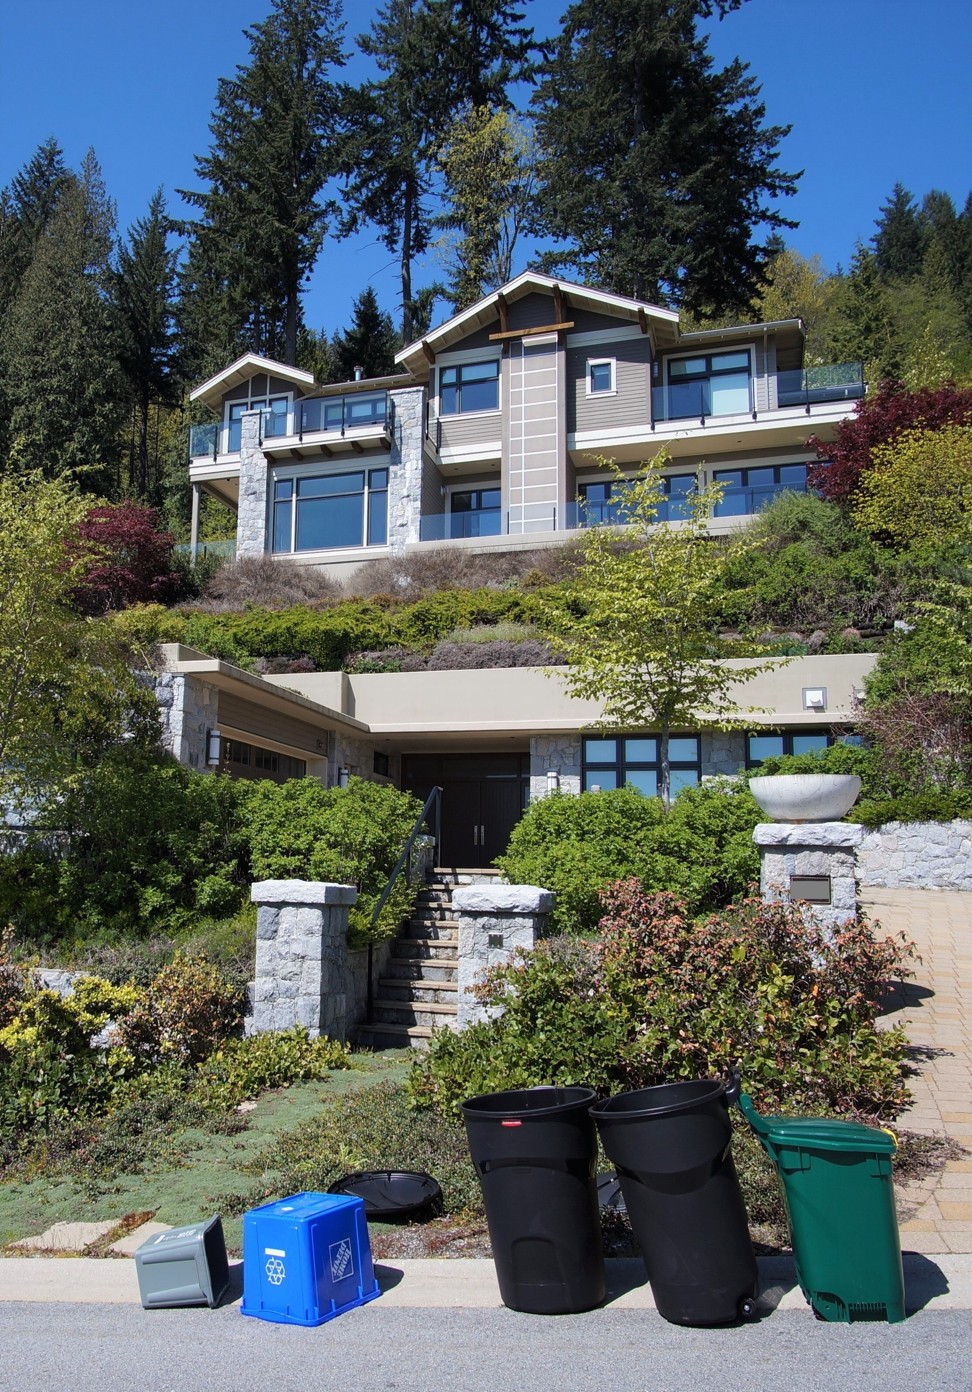 Rubbish bins outside a home in Vancouver where Li Jianhua once intended to live. Photo: Ian Young